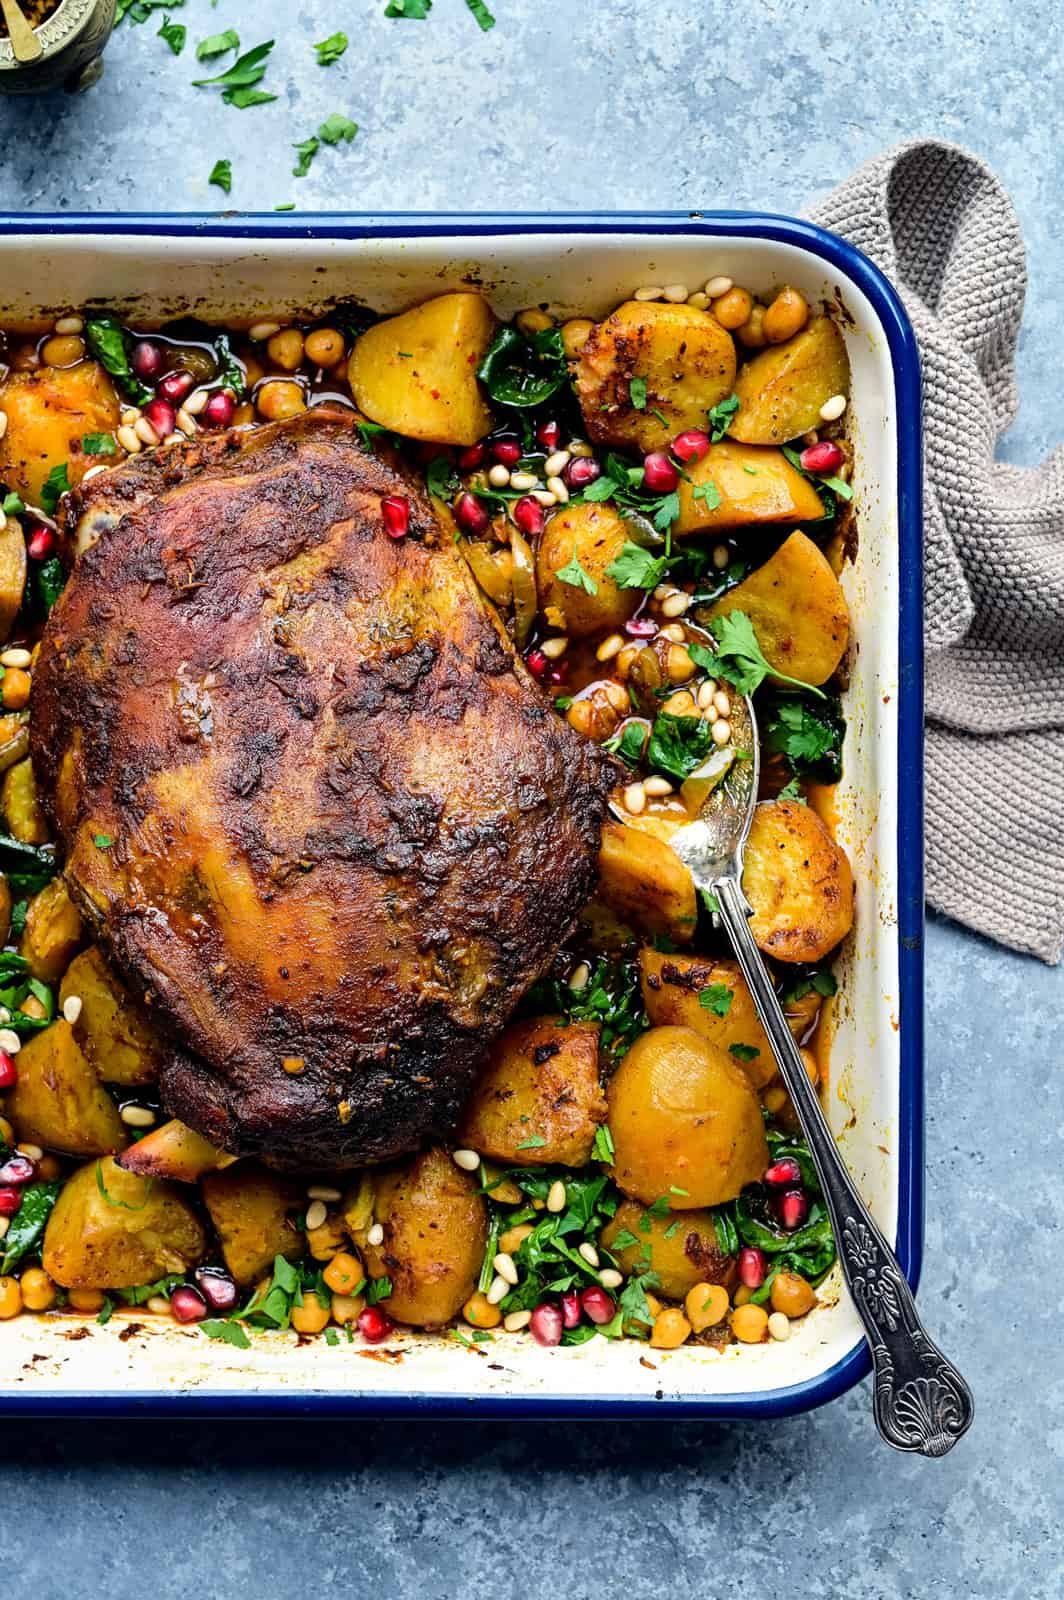 Overhead view of a roasting tin with roast potatoes, chickpeas, spinach and slow cooked lamb shoulder